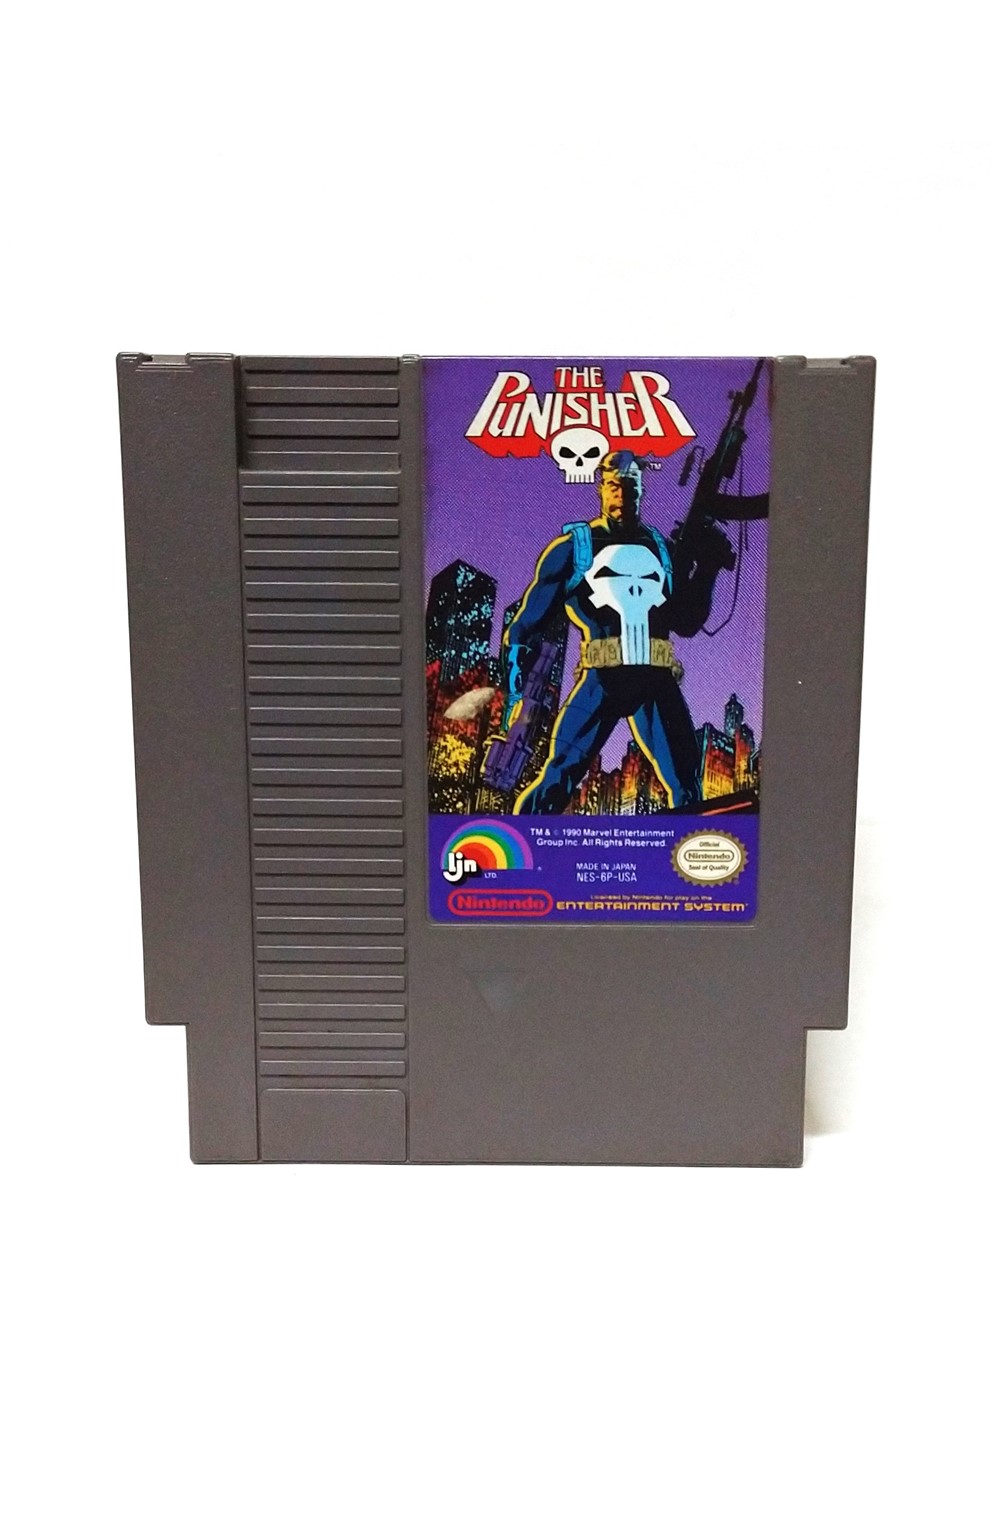 Nintendo Nes The Punisher Cartridge Only (Very Good)